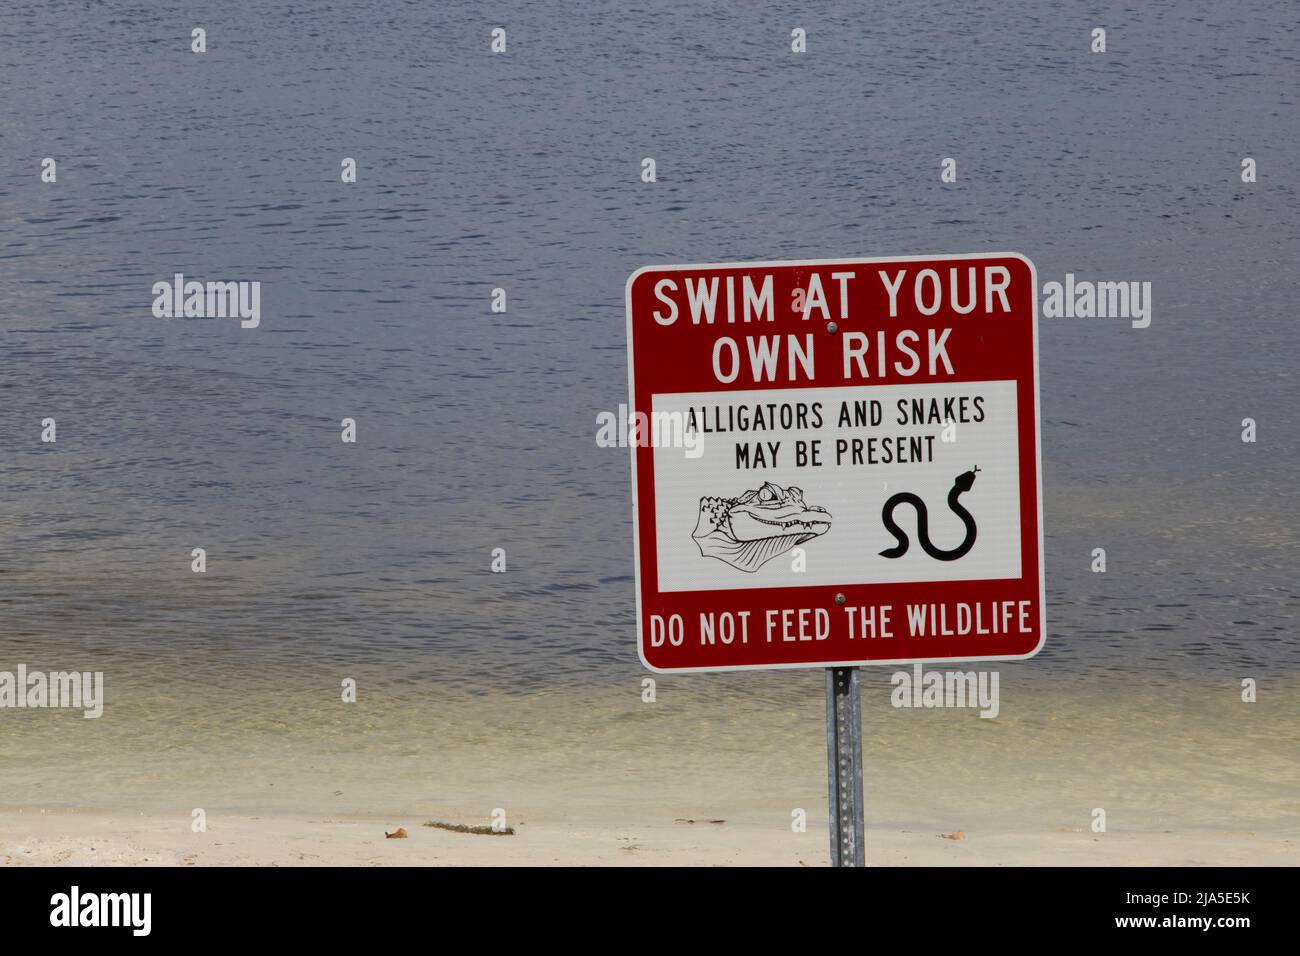 Warning sign at a Florida lake: Swim At Your Own Risk, Alligators and Snakes May Be Present Stock Photo